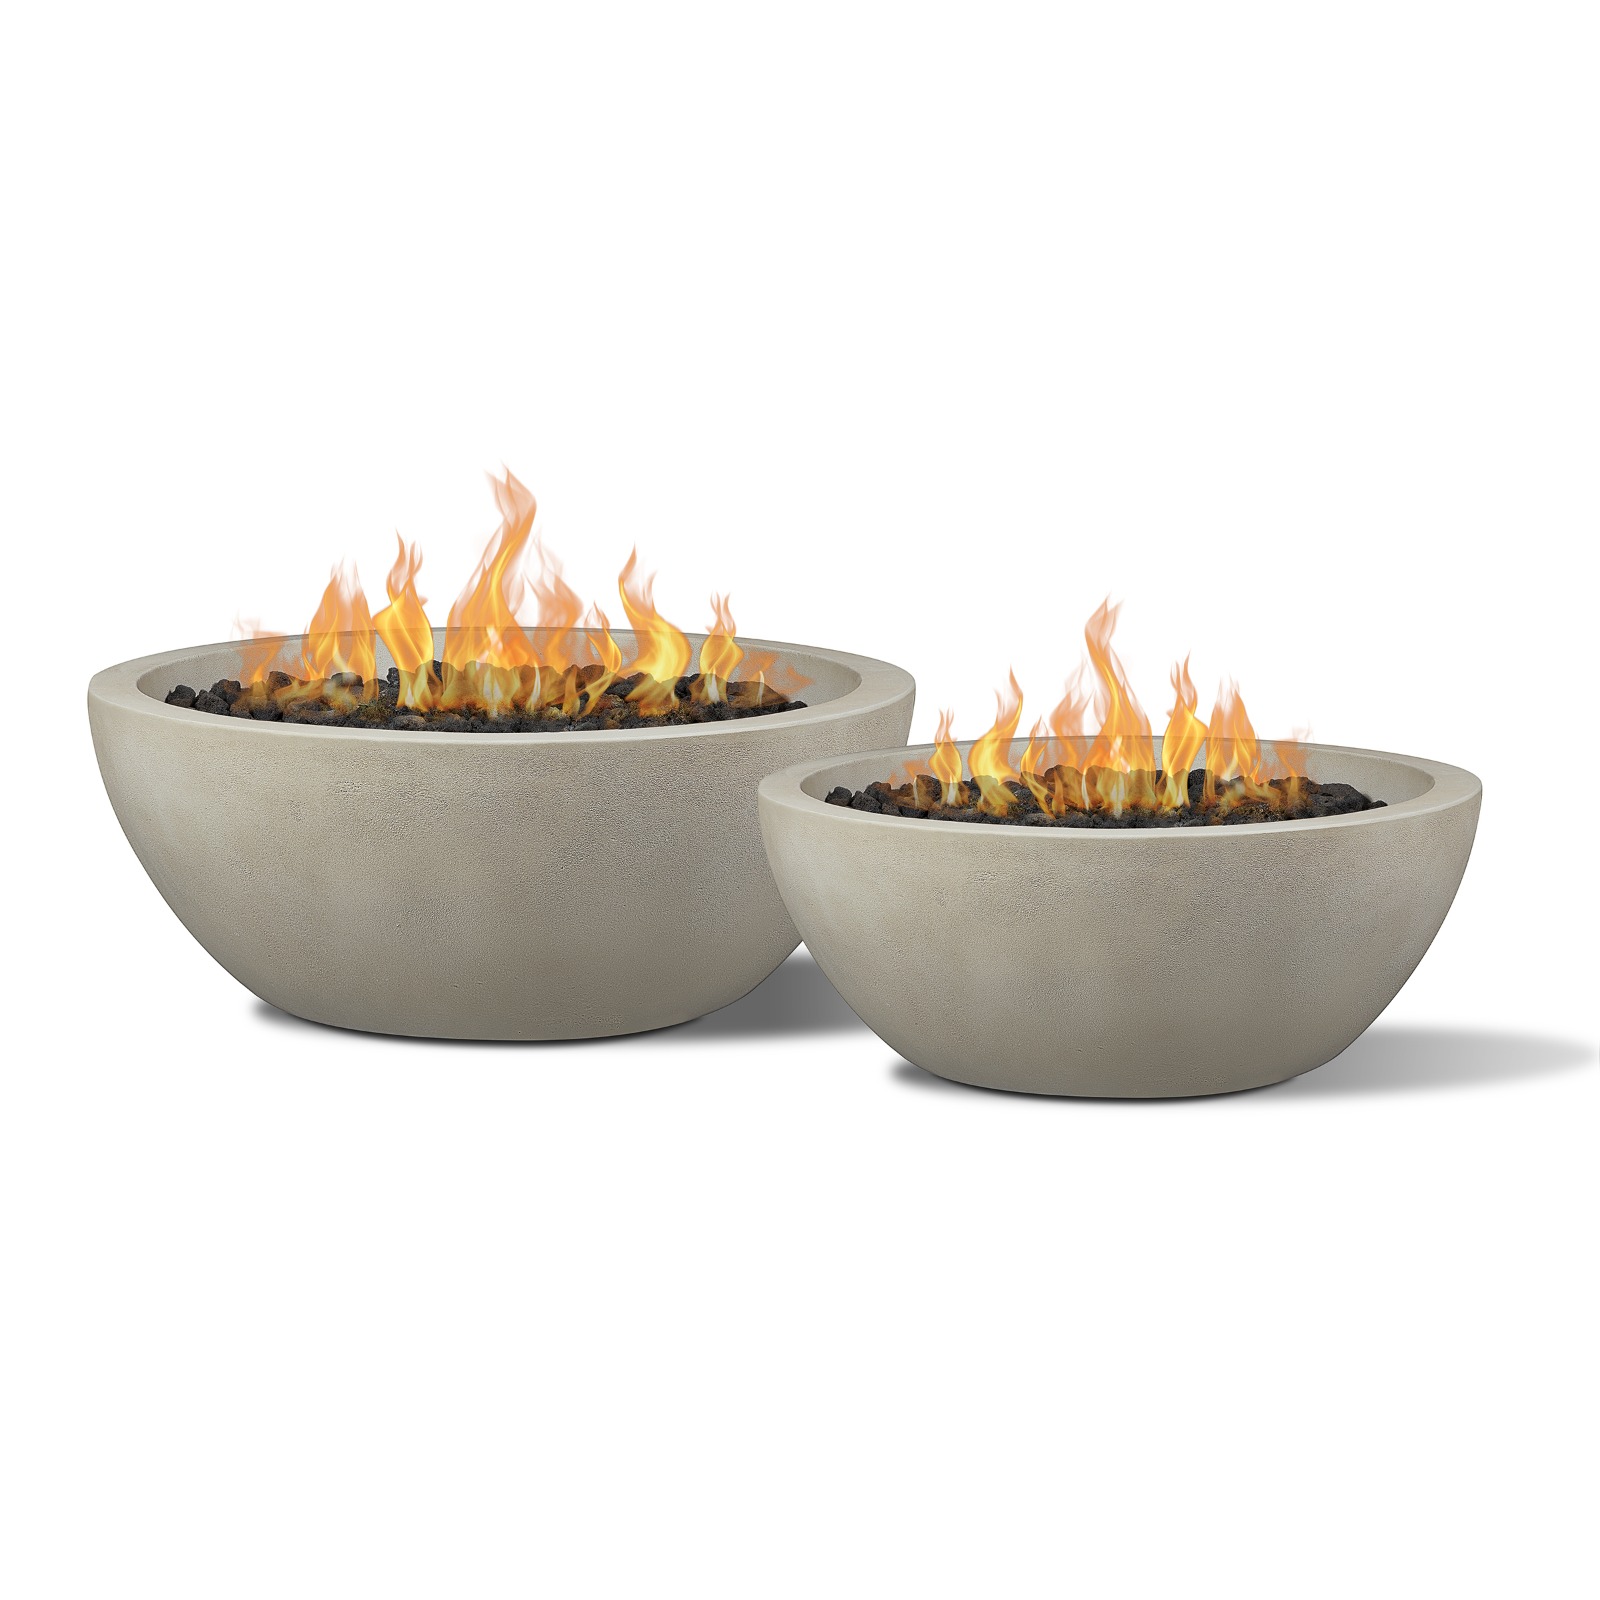 Eldora Pair GFRC Propane Fire Pit Natural Gas Fire Bowl Outdoor Fireplace Fire Table for Backyard or Patio